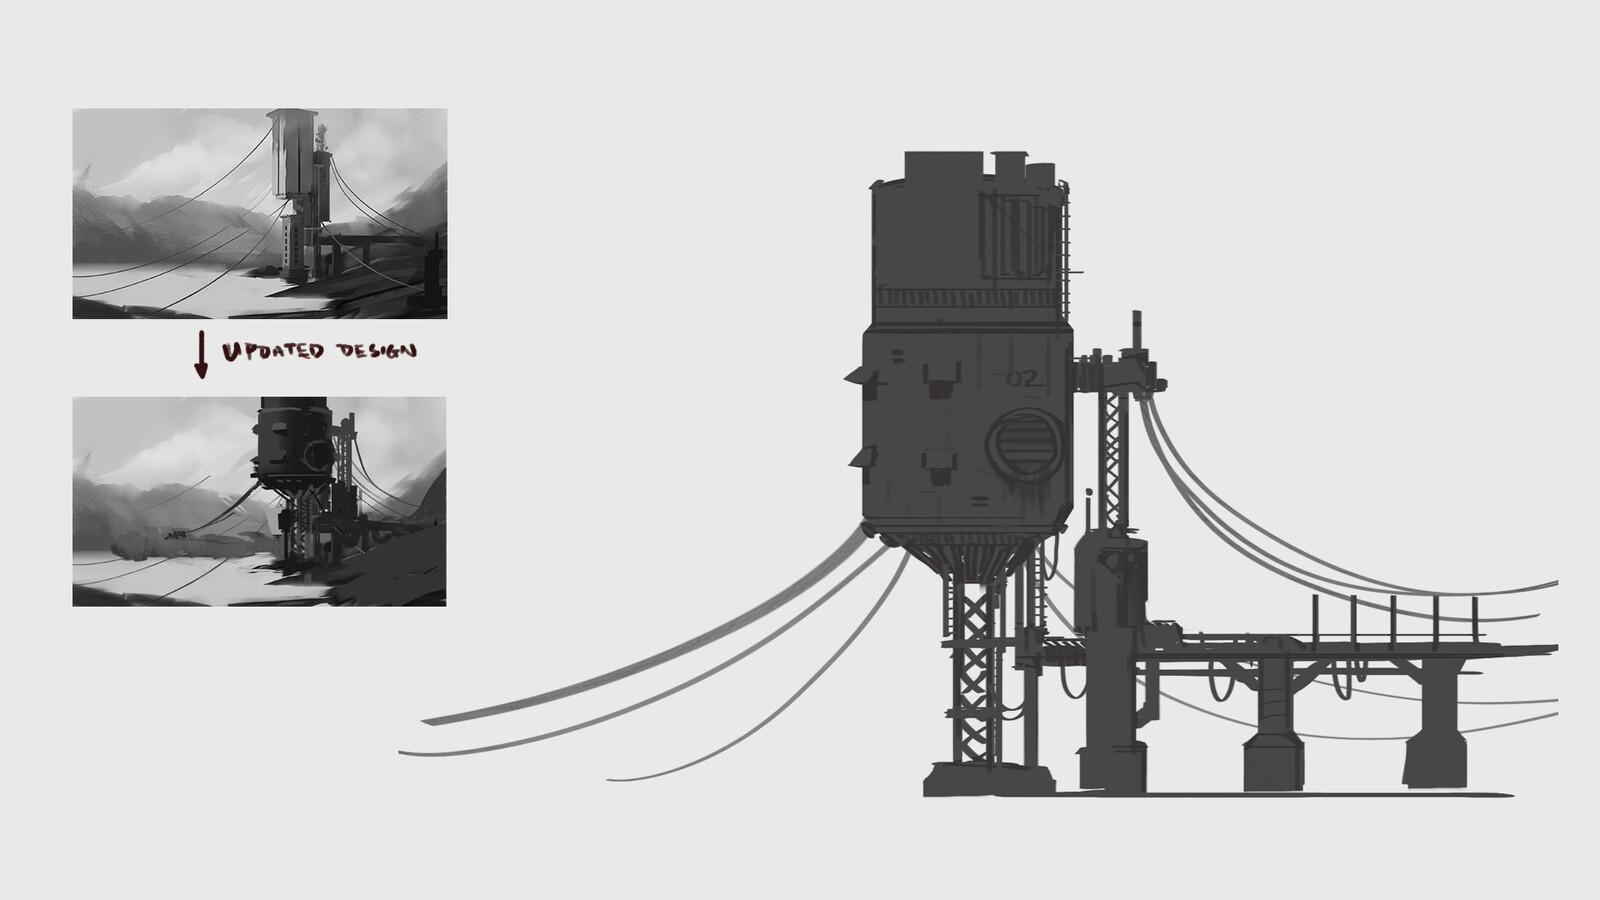 After some initial tests I decided to change the towers design to better fit the kind of mood I wanted to achieve. 